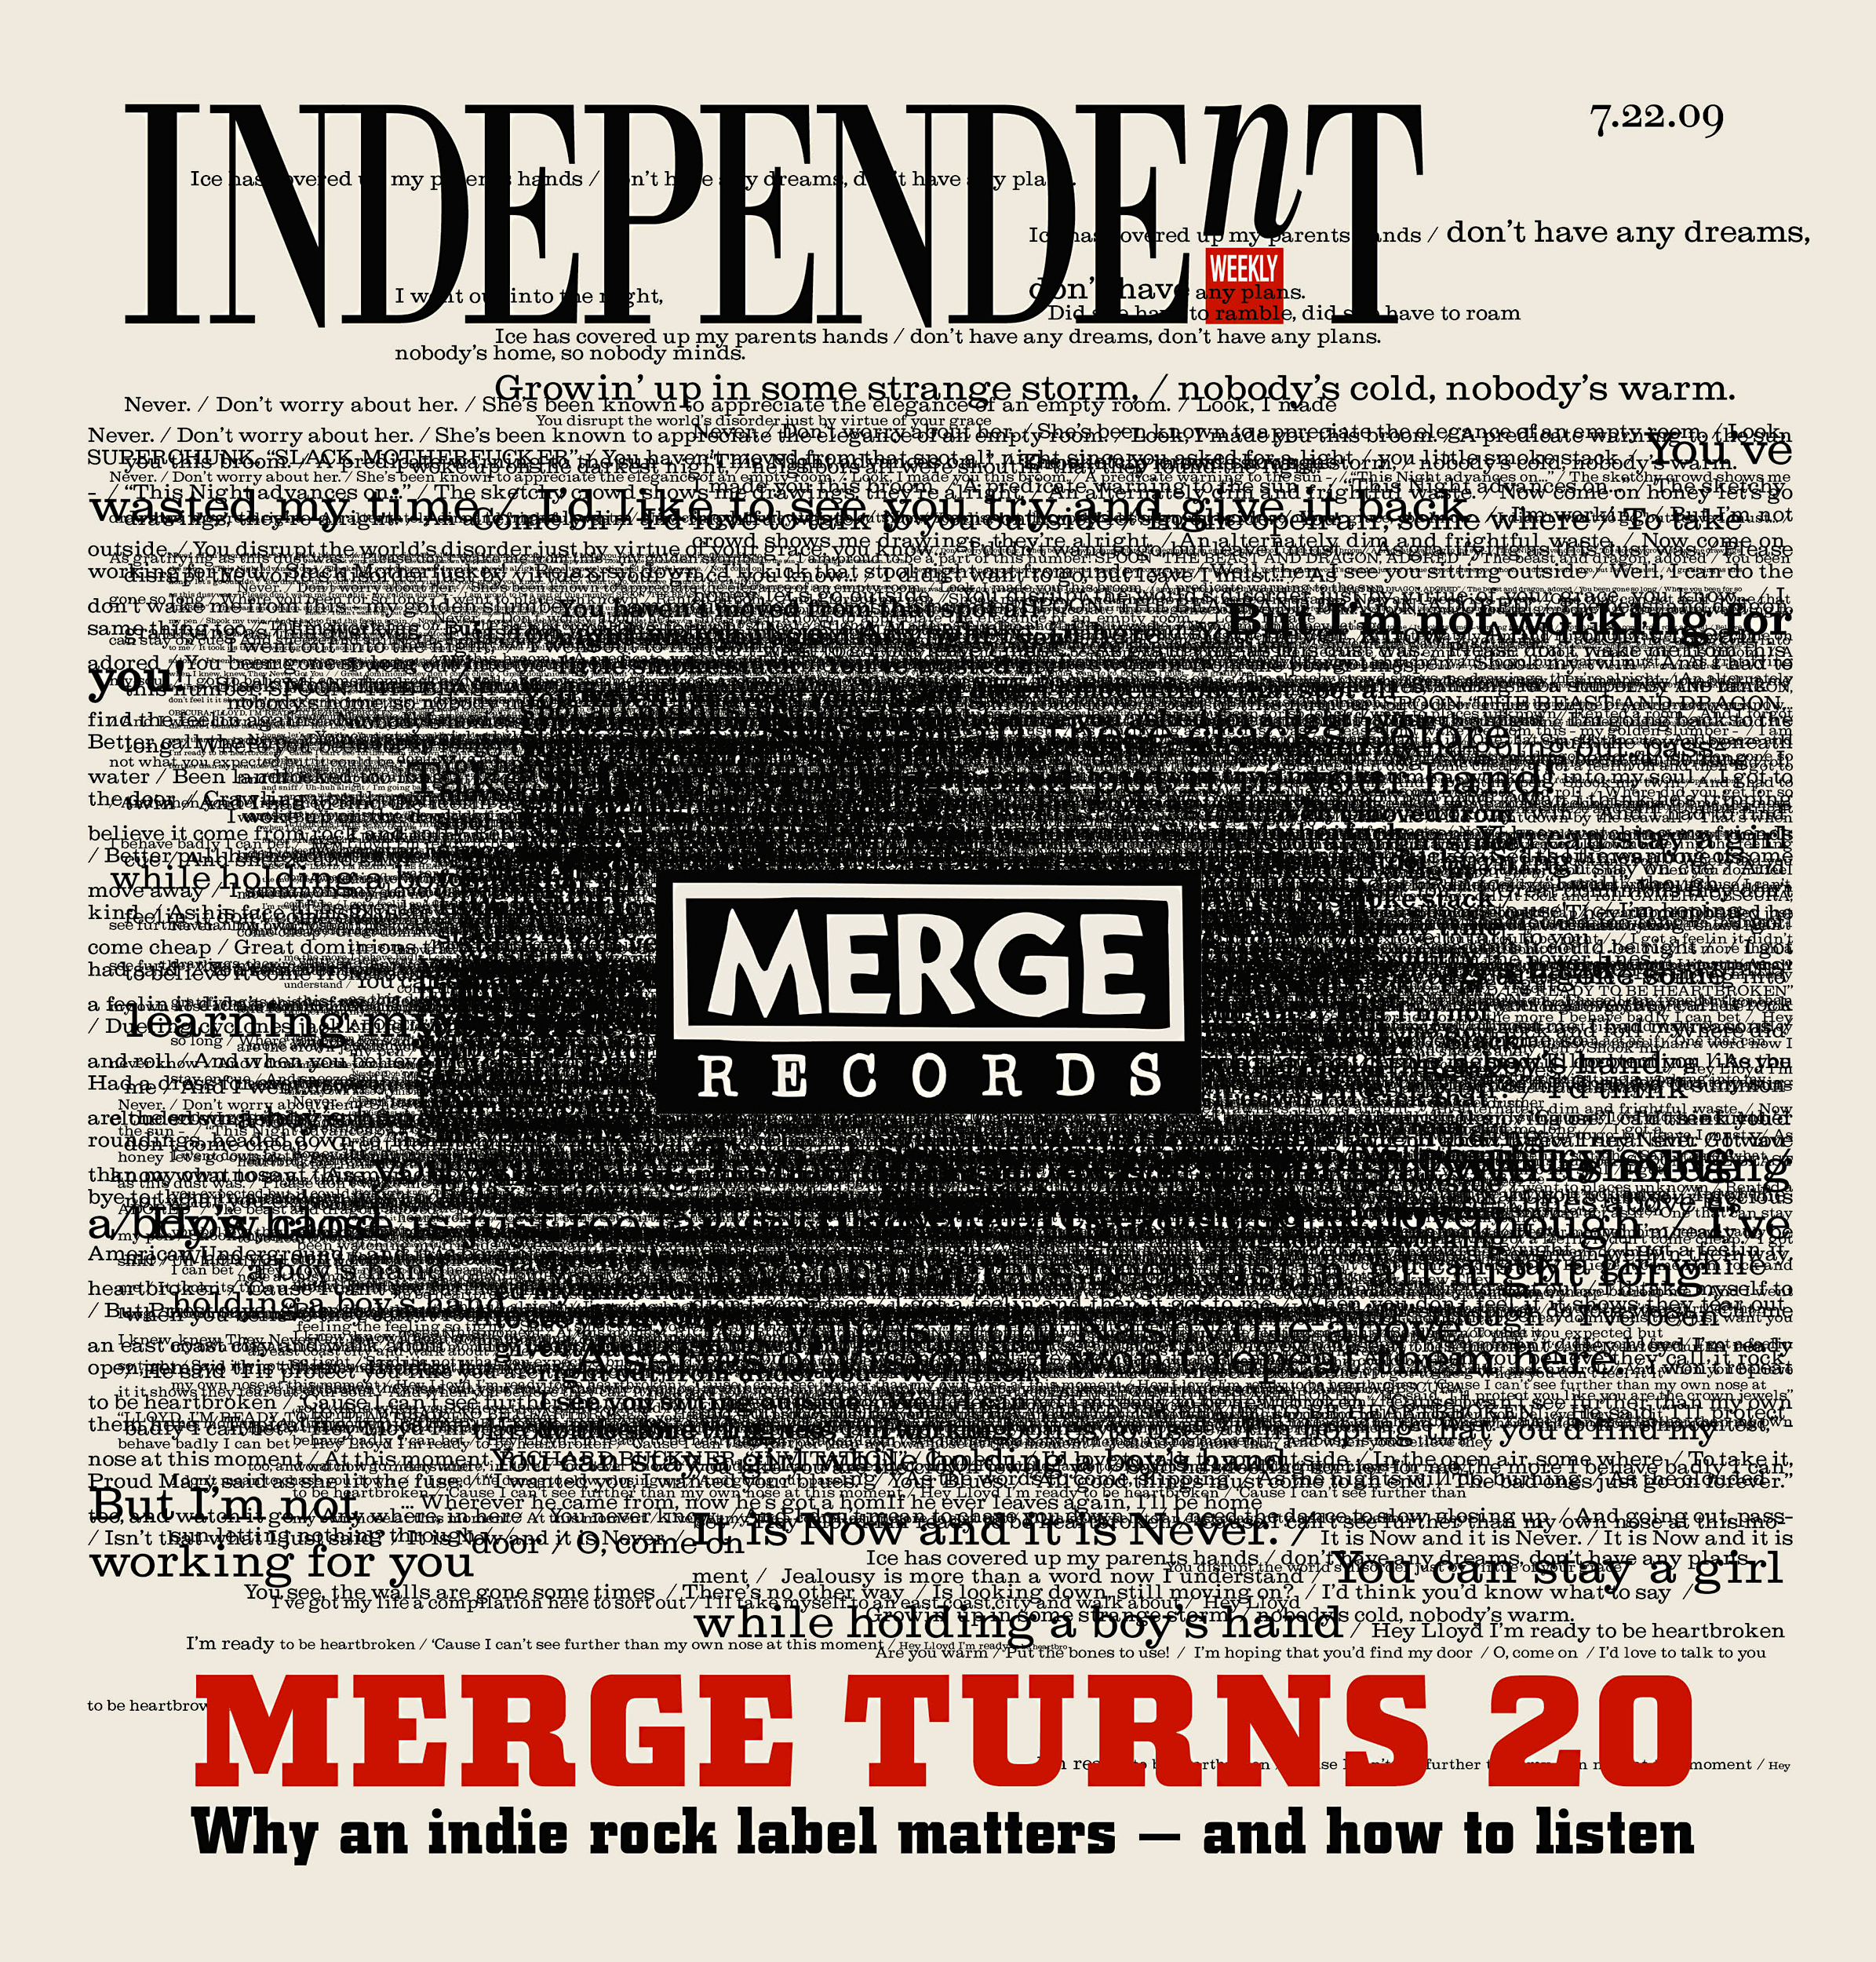  Cover for newsweekly featured a magnetic field of lyrics from various songs that Merge recording artists have released over the years.&nbsp; 